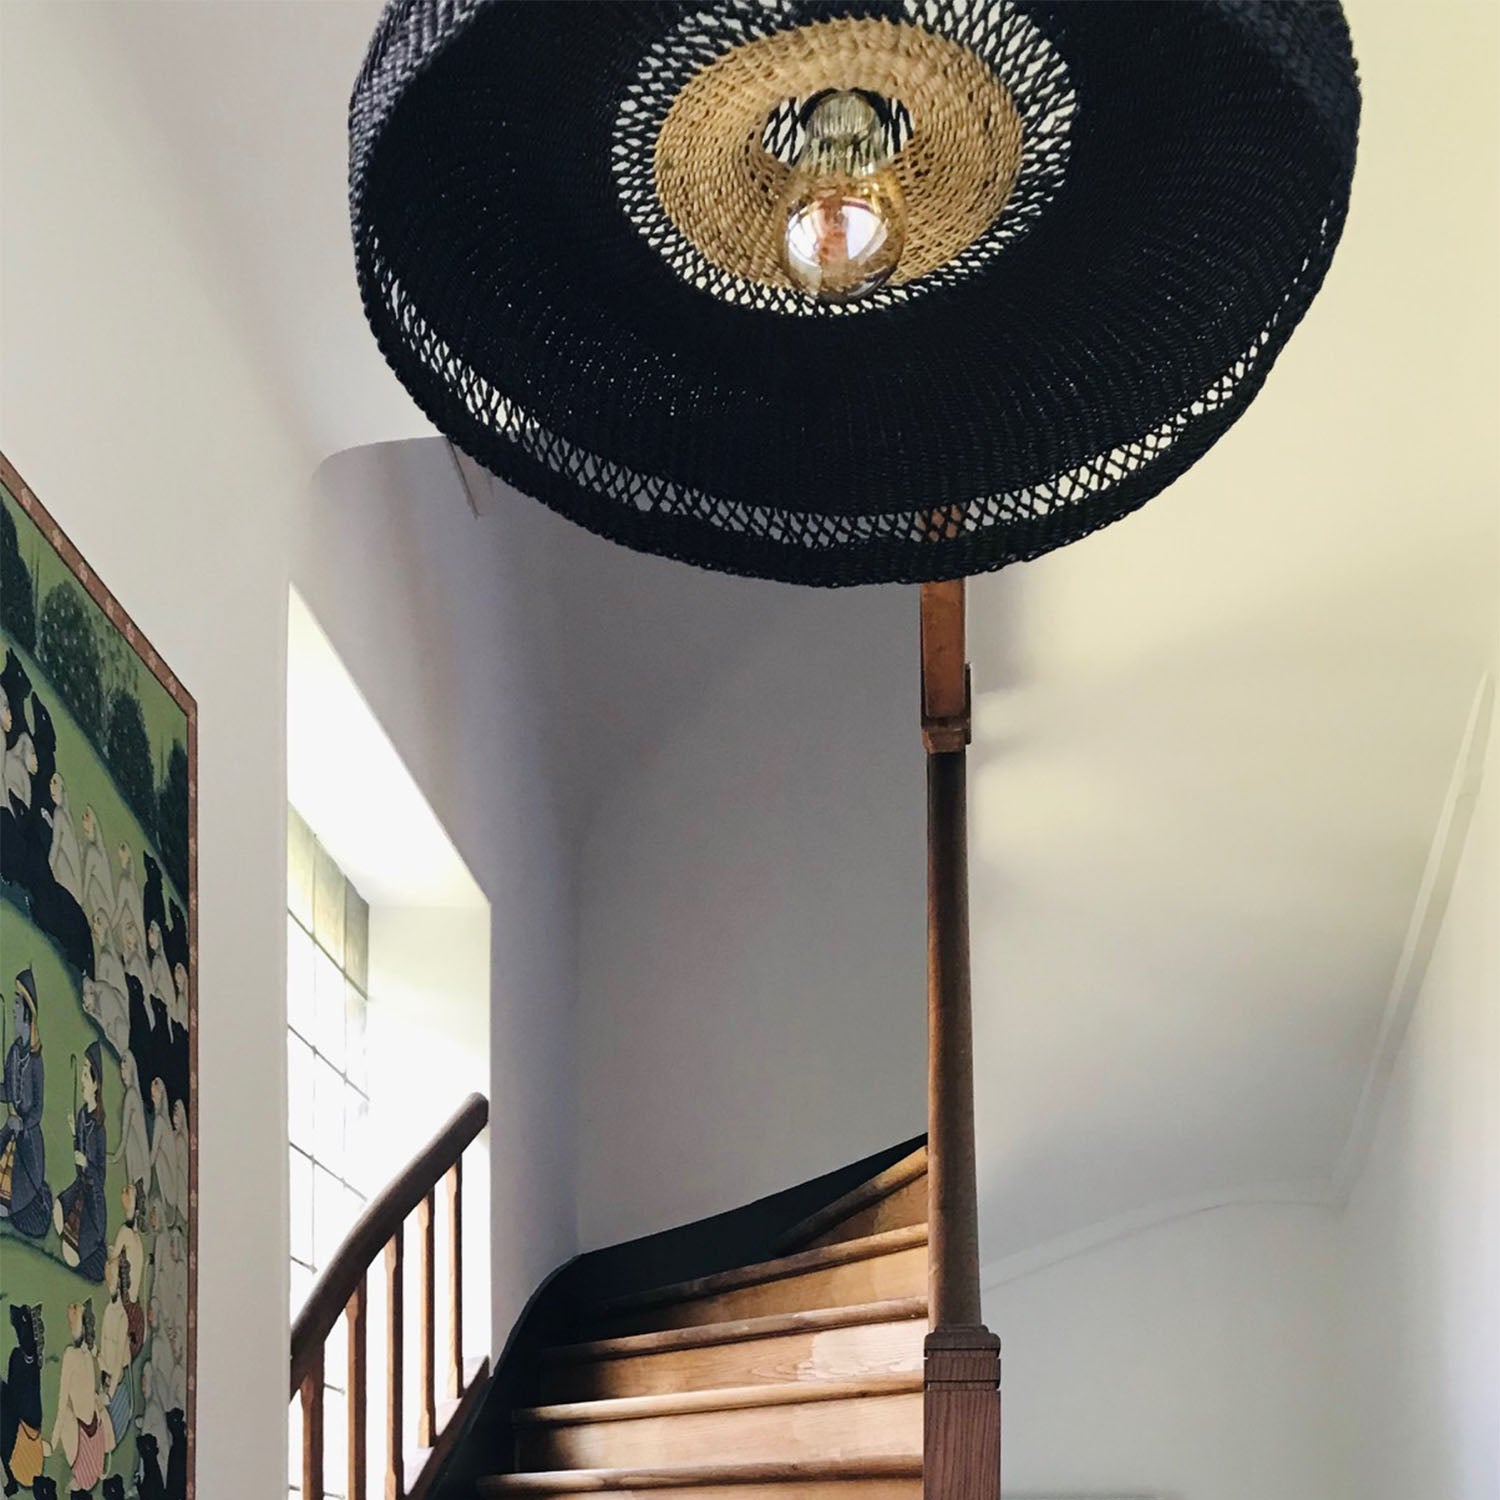 Artfully designed staircase with a whimsical hat lampshade fixture above